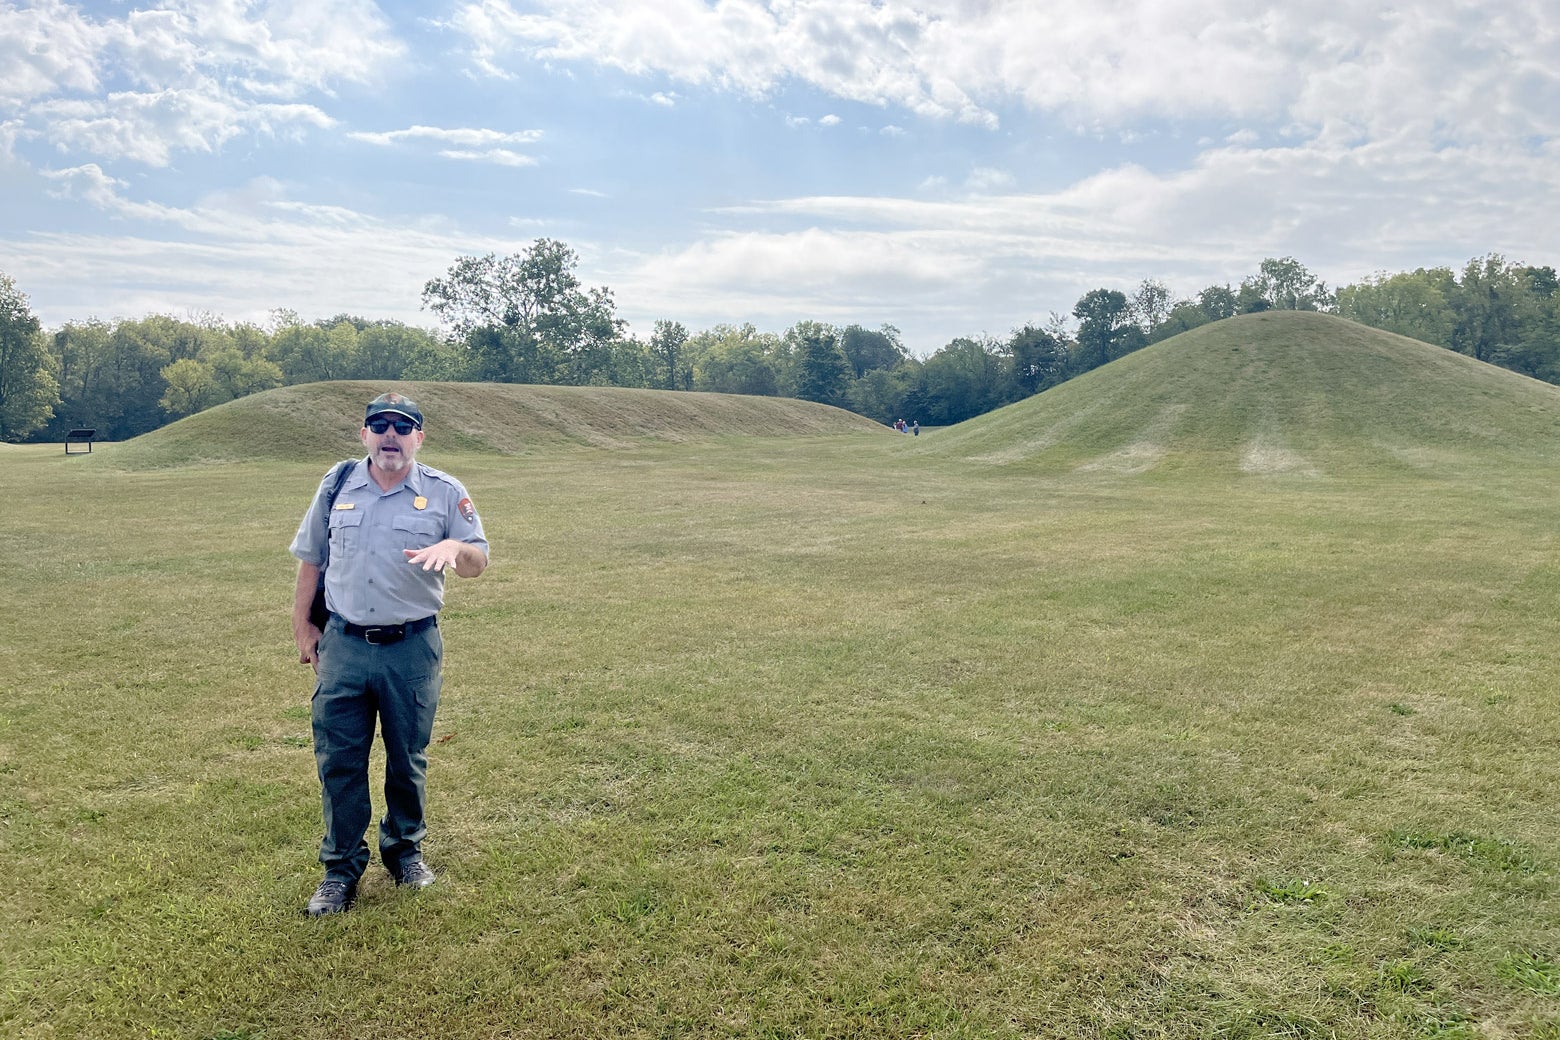 An NPS archaeologist speaks animatedly near a pronounced, almost conical mound. 